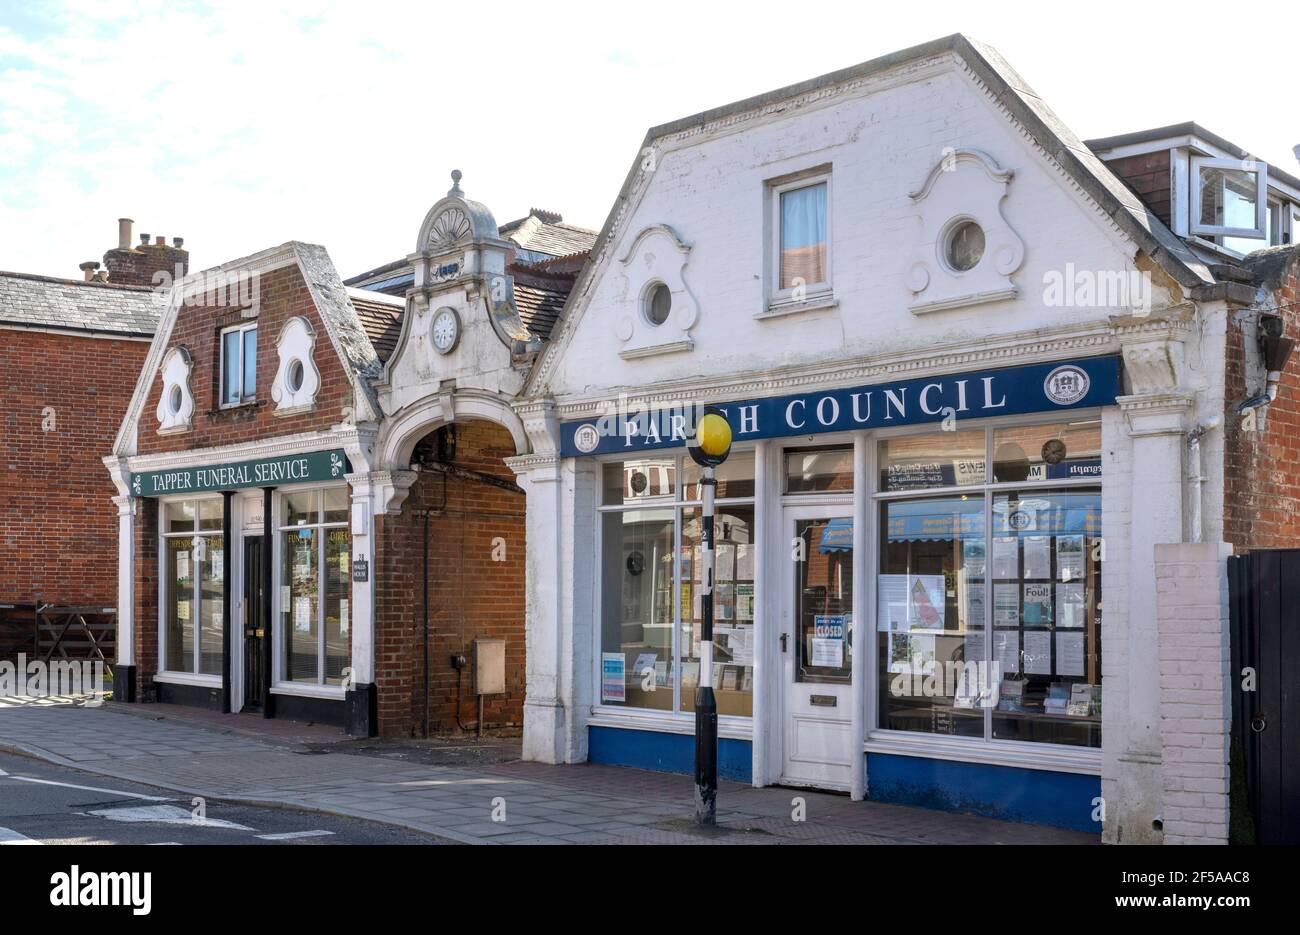 Parish Council offices, High Street, Milford-on-Sea, New Forest, Hampshire, England, UK Stock Photo